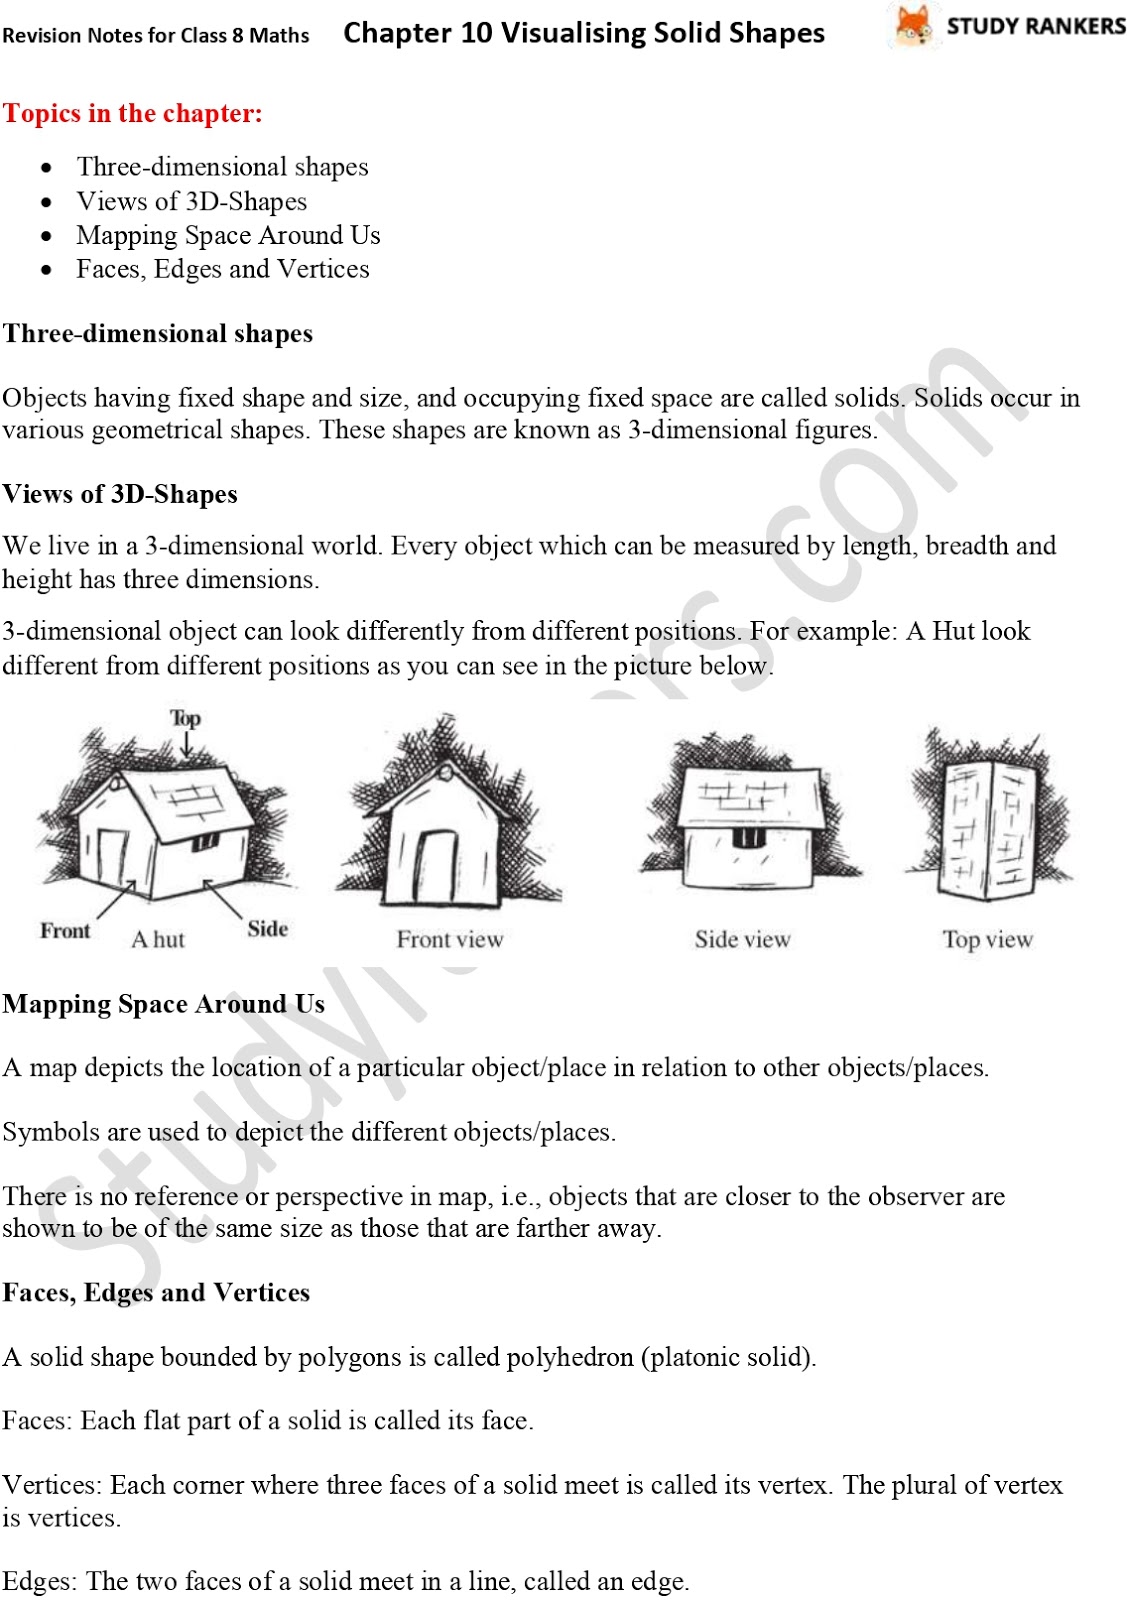 CBSE Revision Notes for Class 8 Chapter 10 Visualising Solid Shapes Part 1